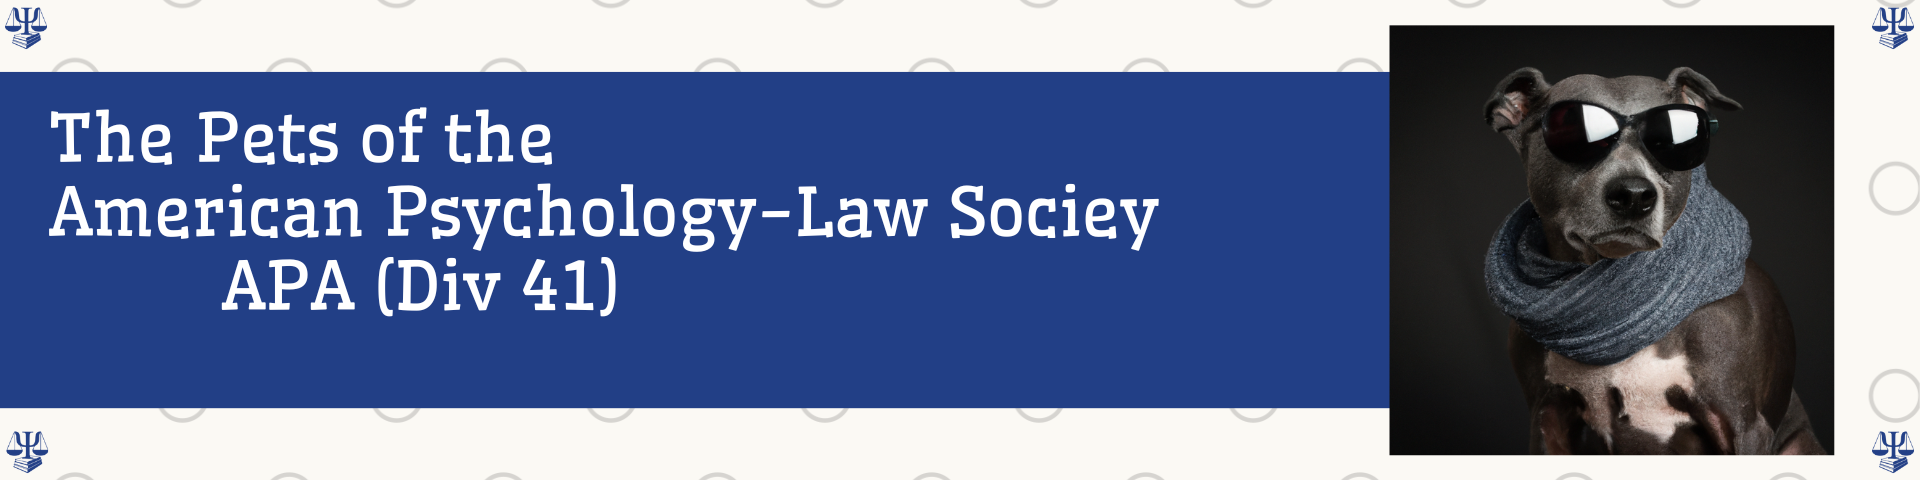 Banner photo with the text "The Pets of the American Psychology-Law Society APA (Div 41) and then on the right side a photo of a pitbull wearing sunglasses and a fashion scarf.